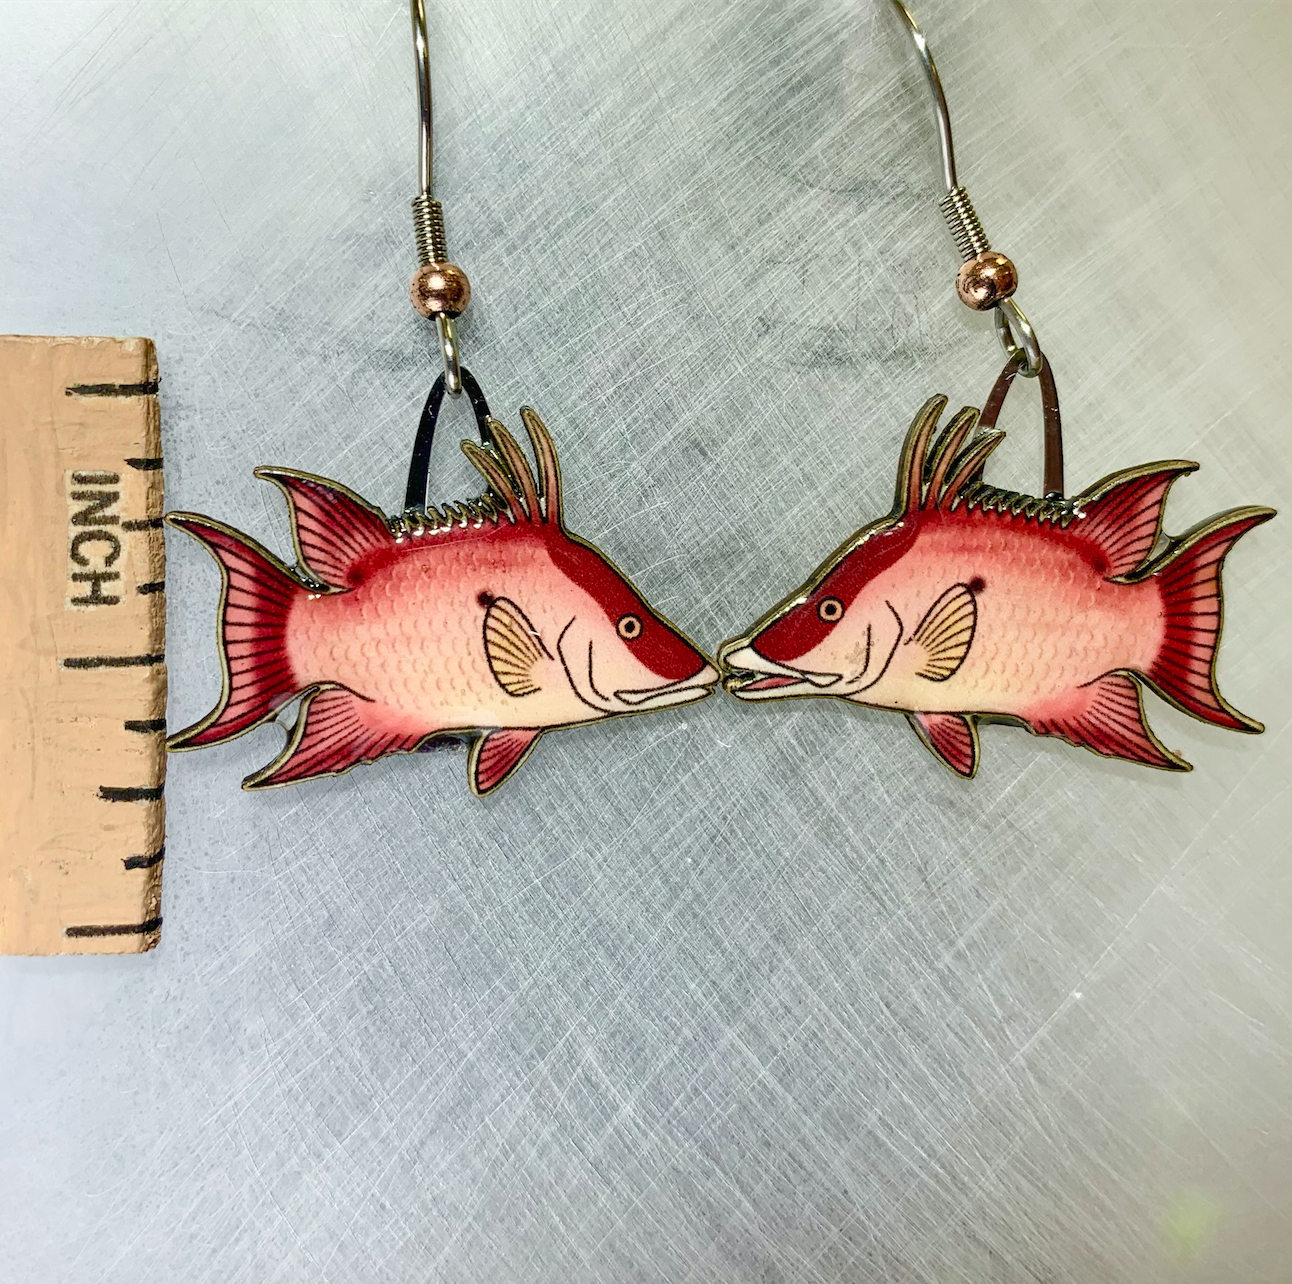 Picture shown is of 1 inch tall pair of earrings of the fish the Hogfish.